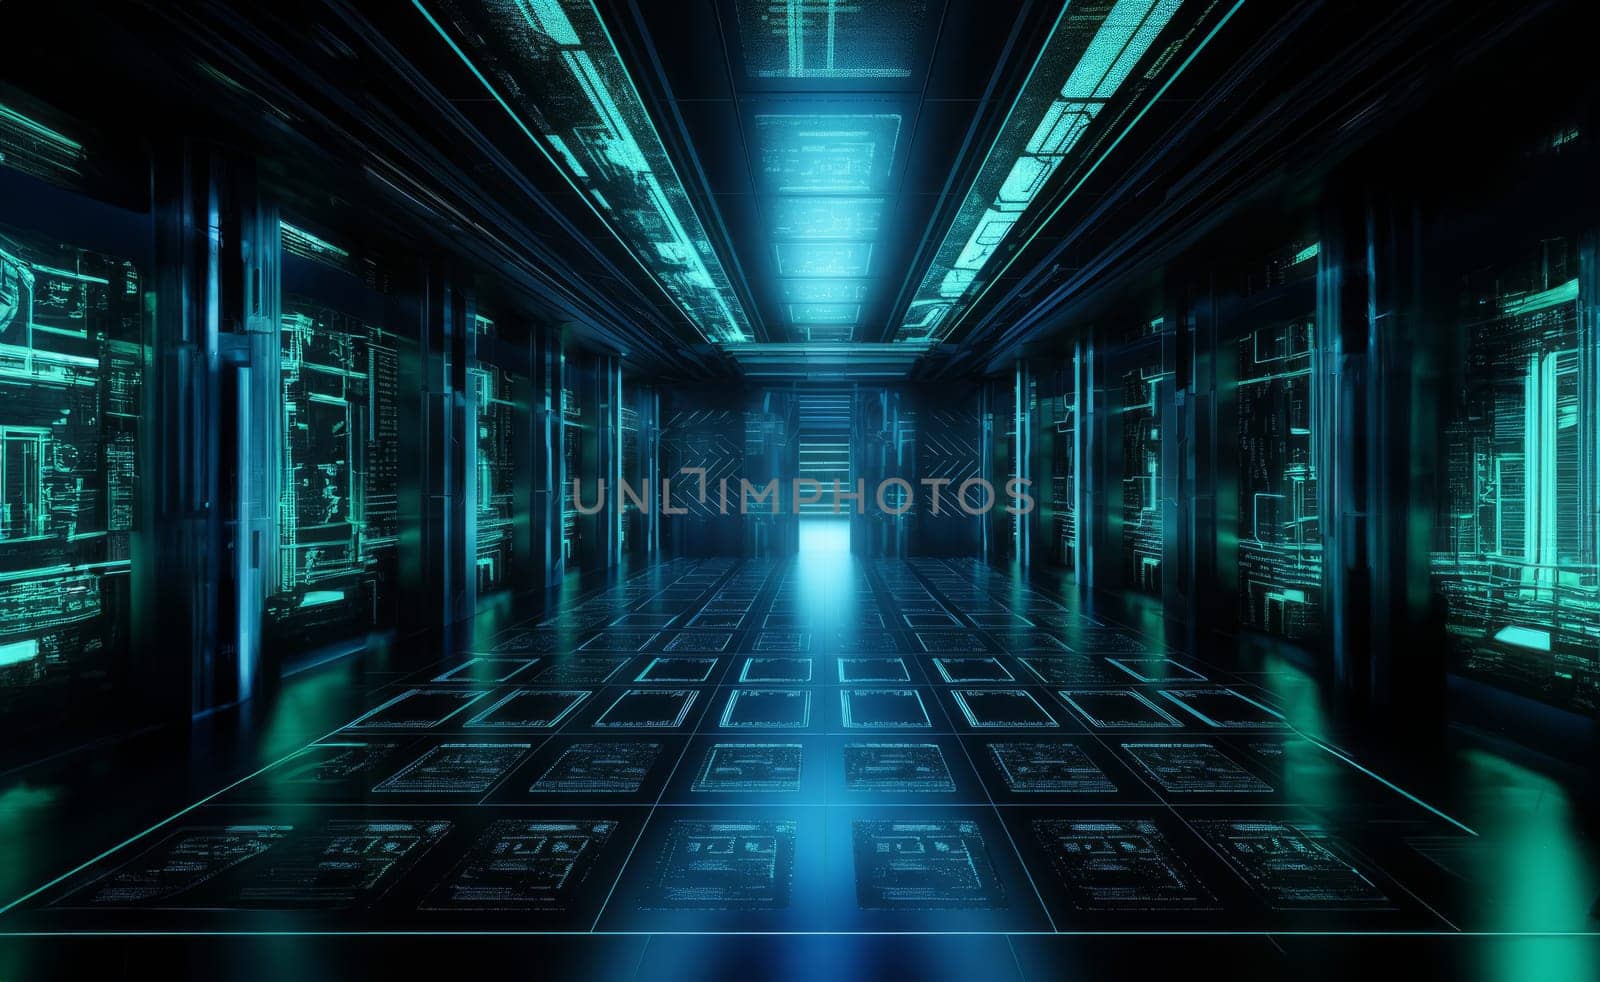 The photograph captures the interior of a modern, spacious server room, showcasing rows of equipment, racks, and cables, illustrating the technological infrastructure and complexity required for data management and network operations.Generated image by dotshock